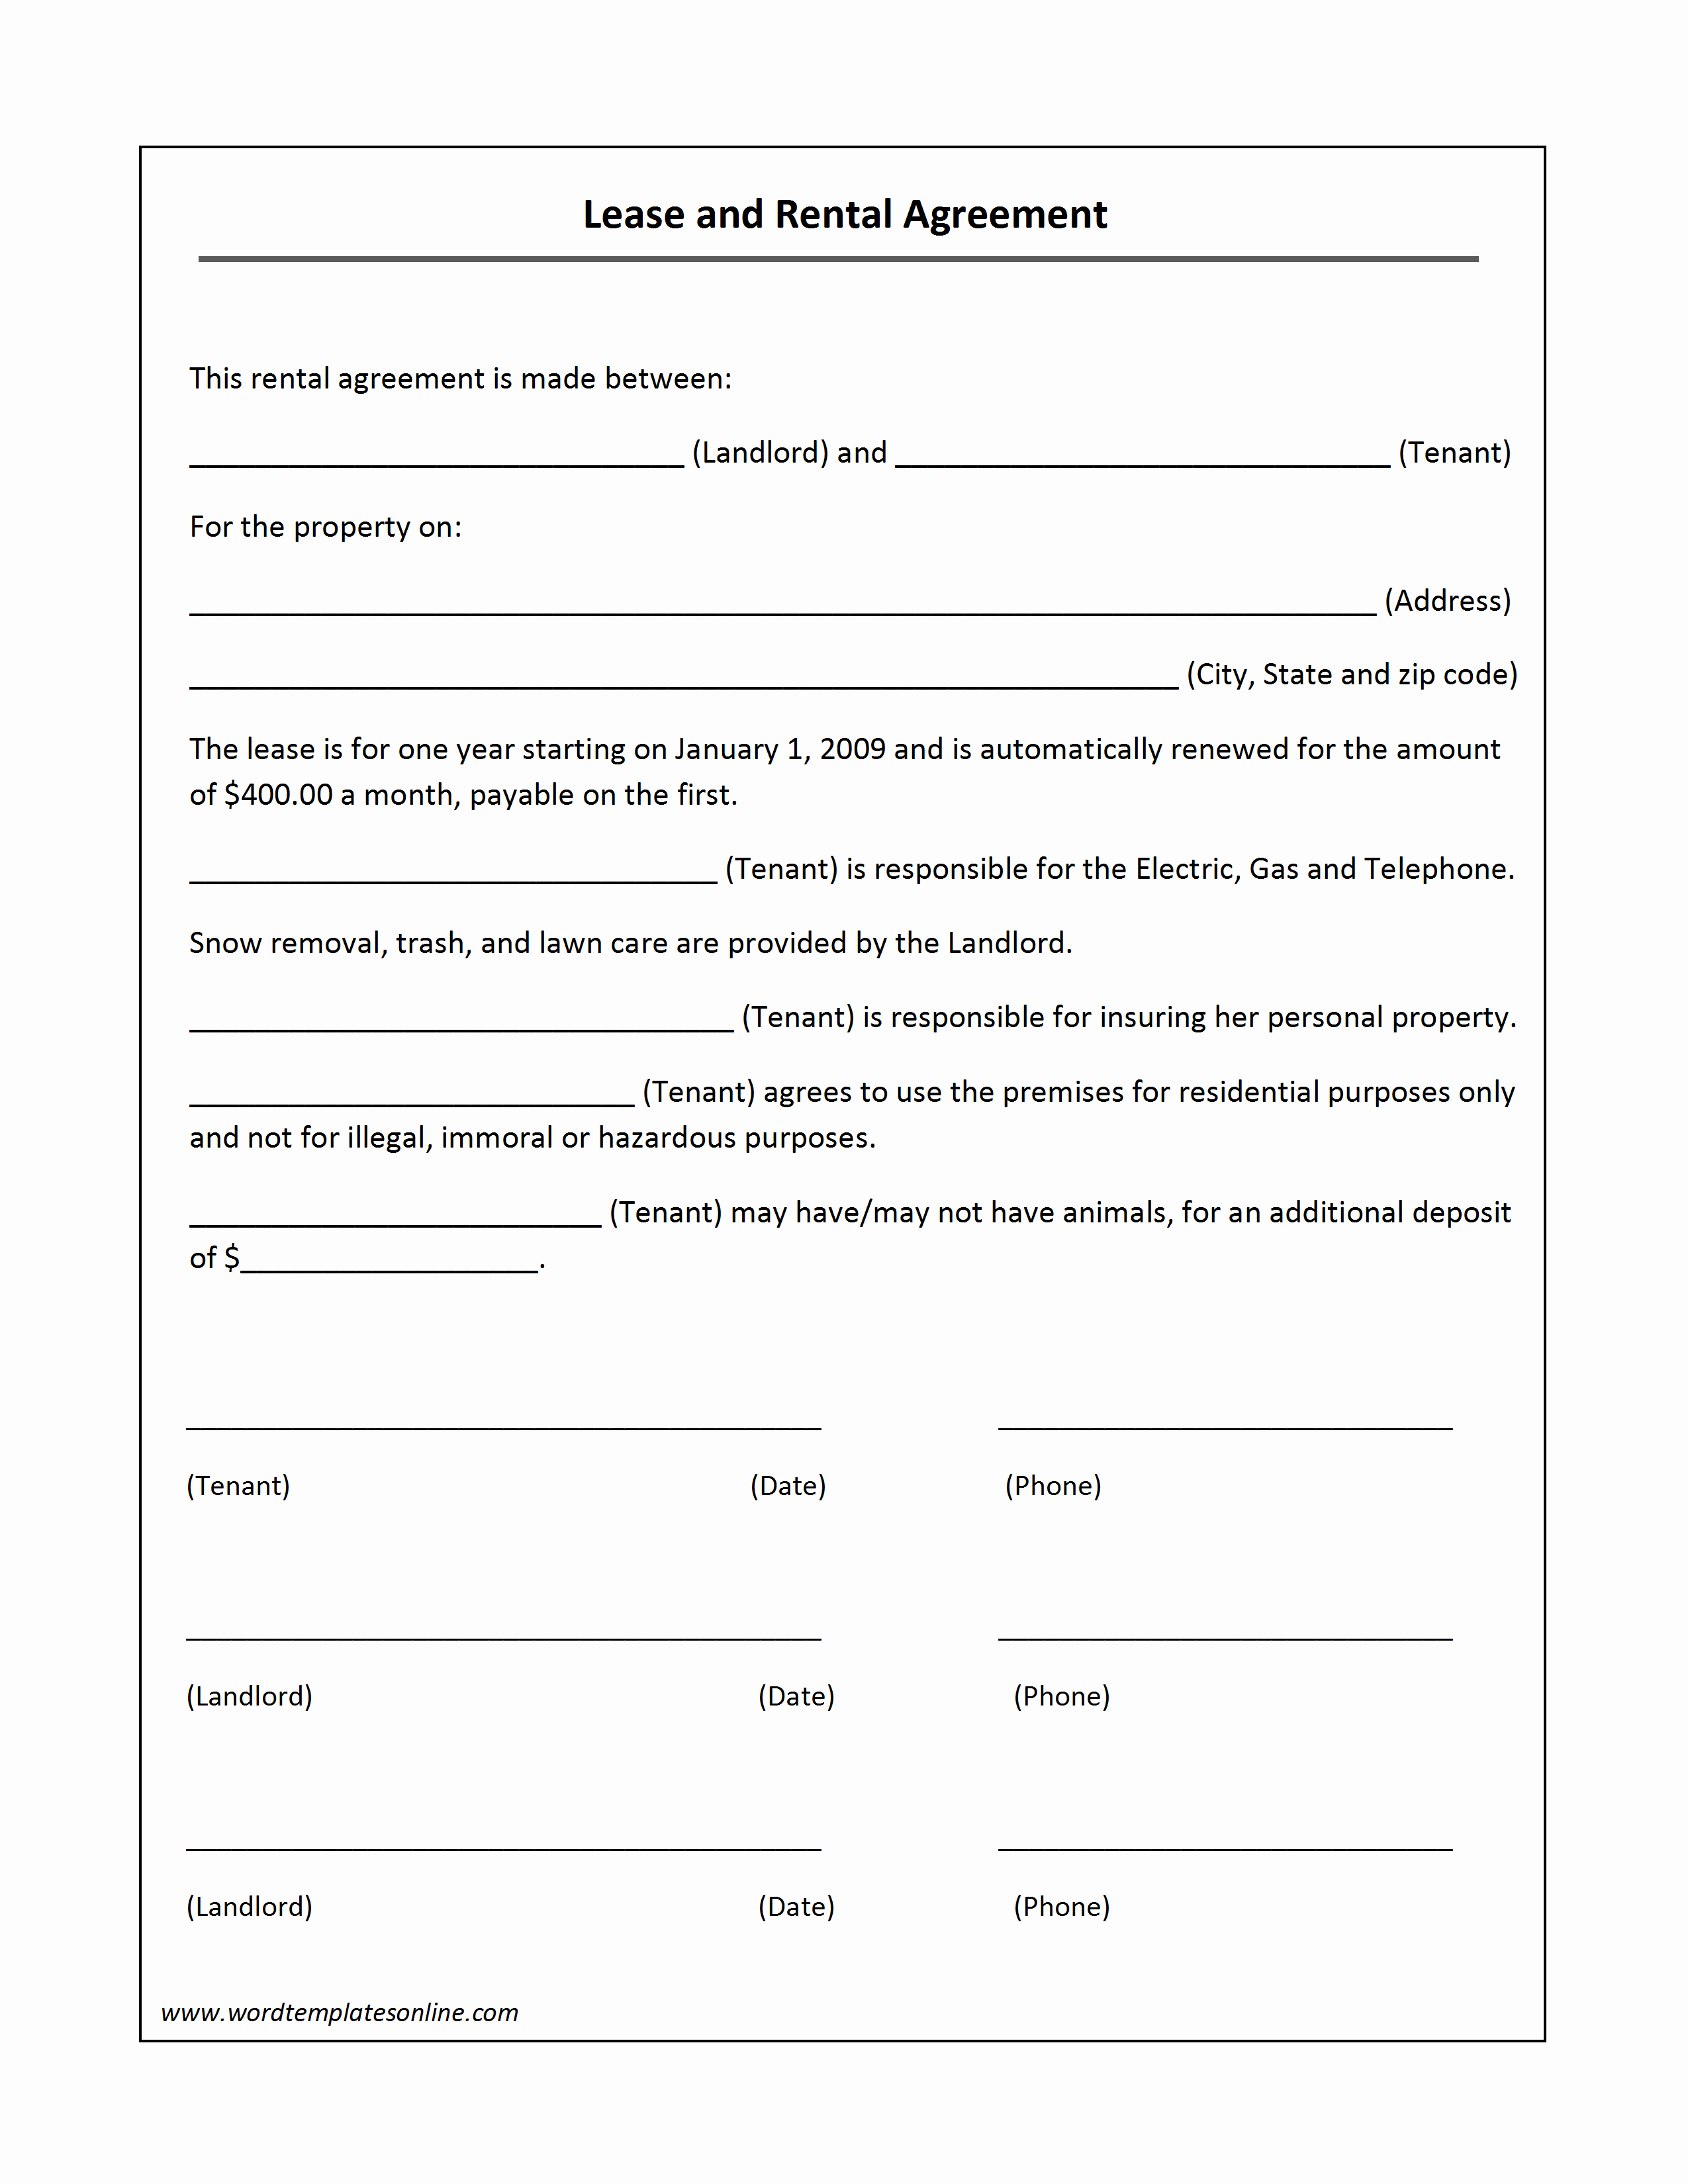 Land Lease Agreement Template Fresh Lease Agreement Template